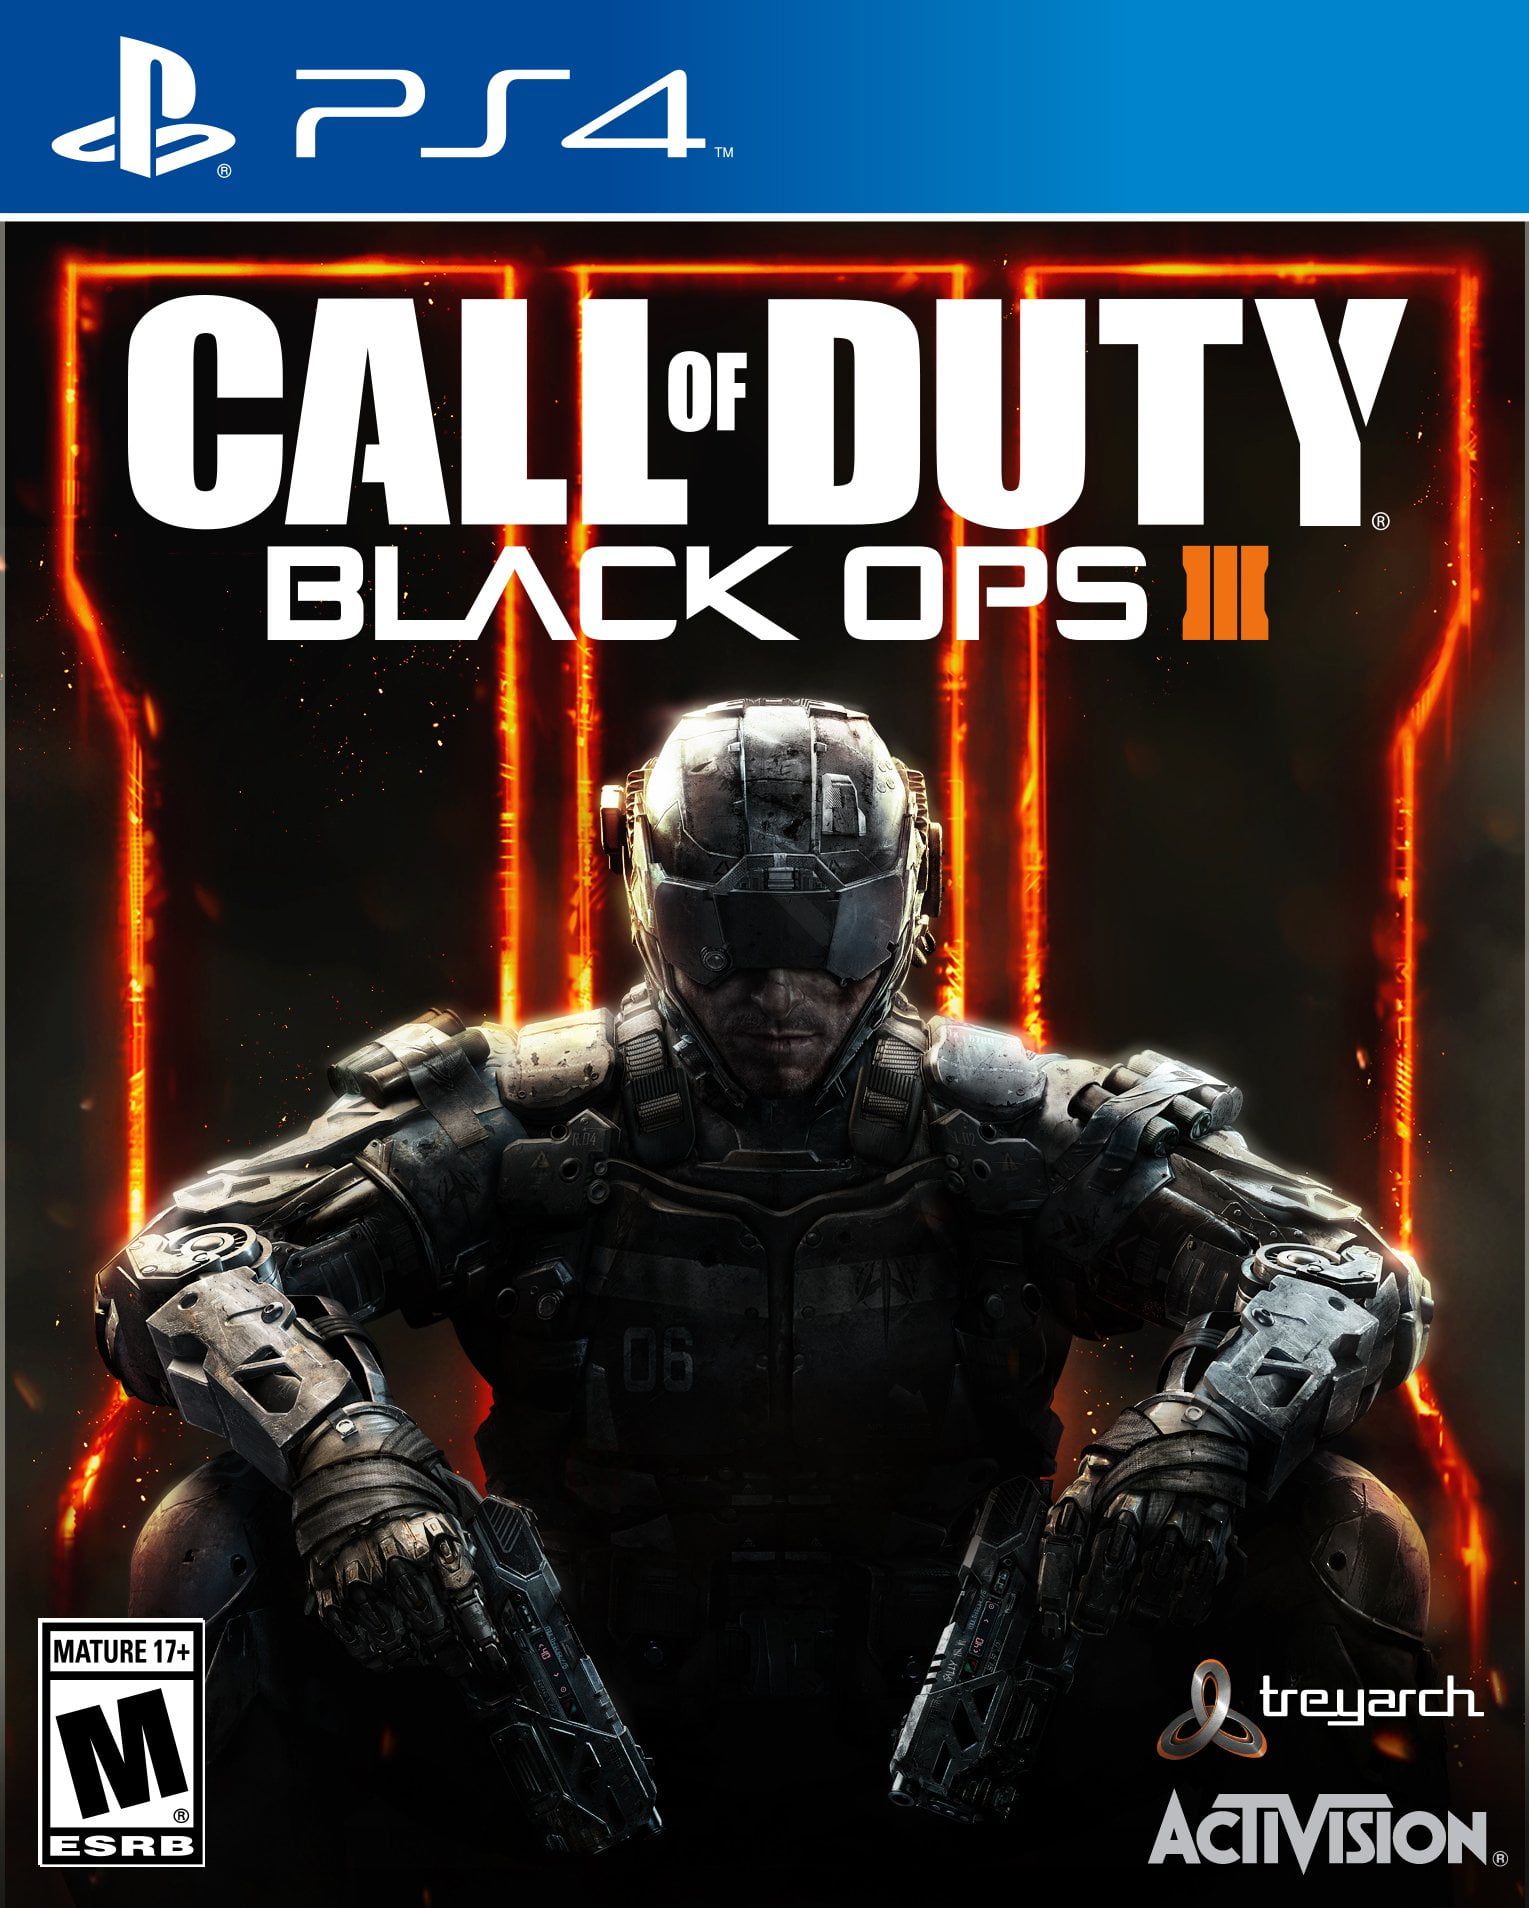 ps store black ops 4